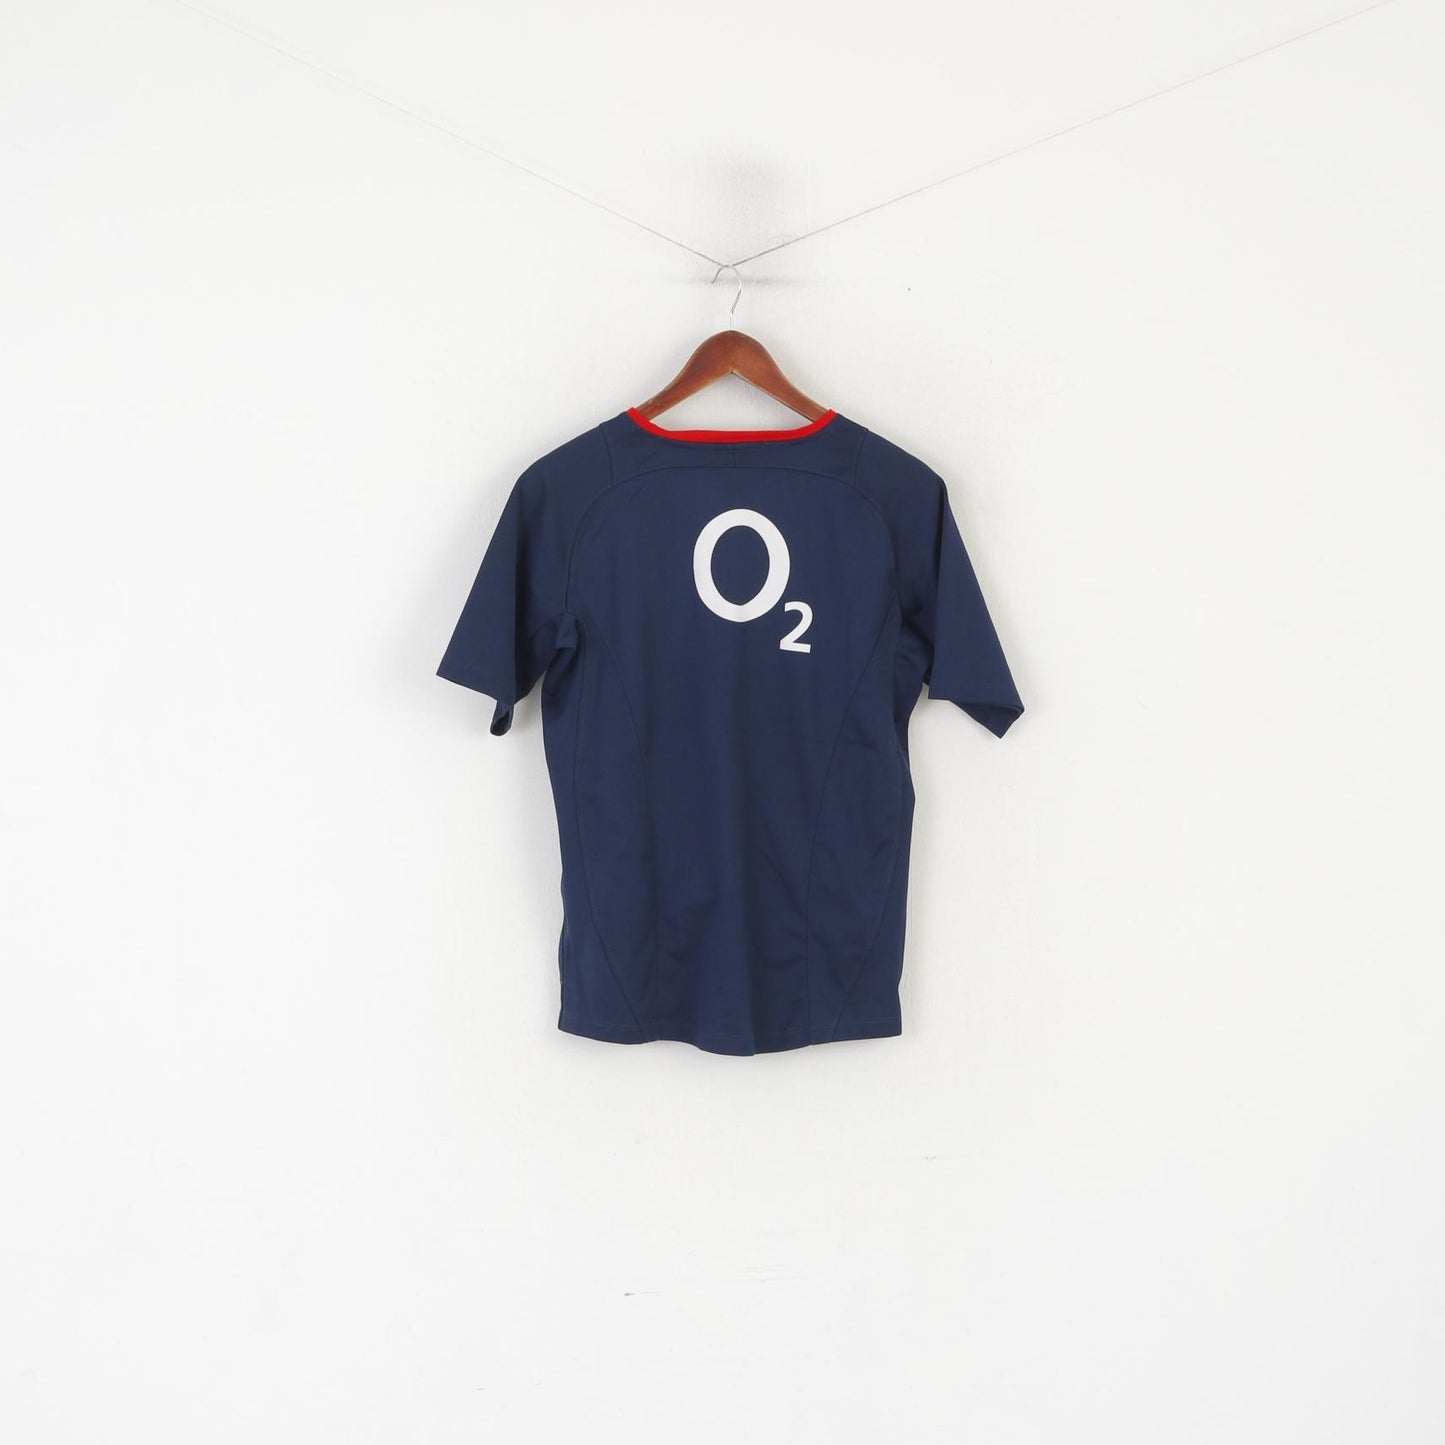 Nike Boys 158-170 13-15 Age Shirt Navy Rugby England O2 Jersey Top